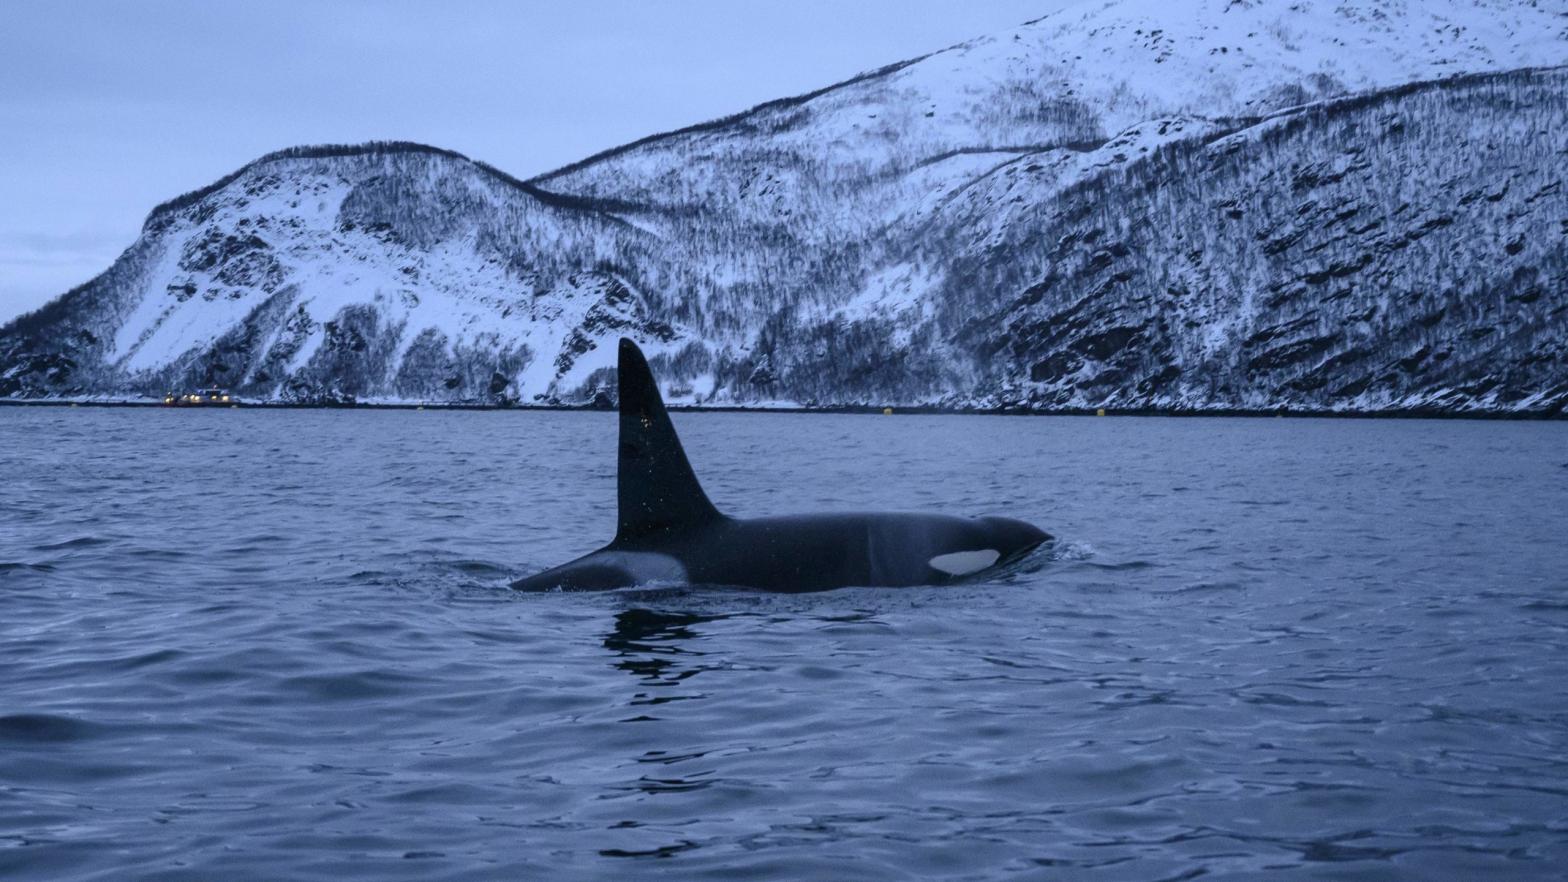 An orca chases herrings on Jan. 14, 2019 near the Norwegian northern city of Tromso. (Photo: Olivier Morin, Getty Images)